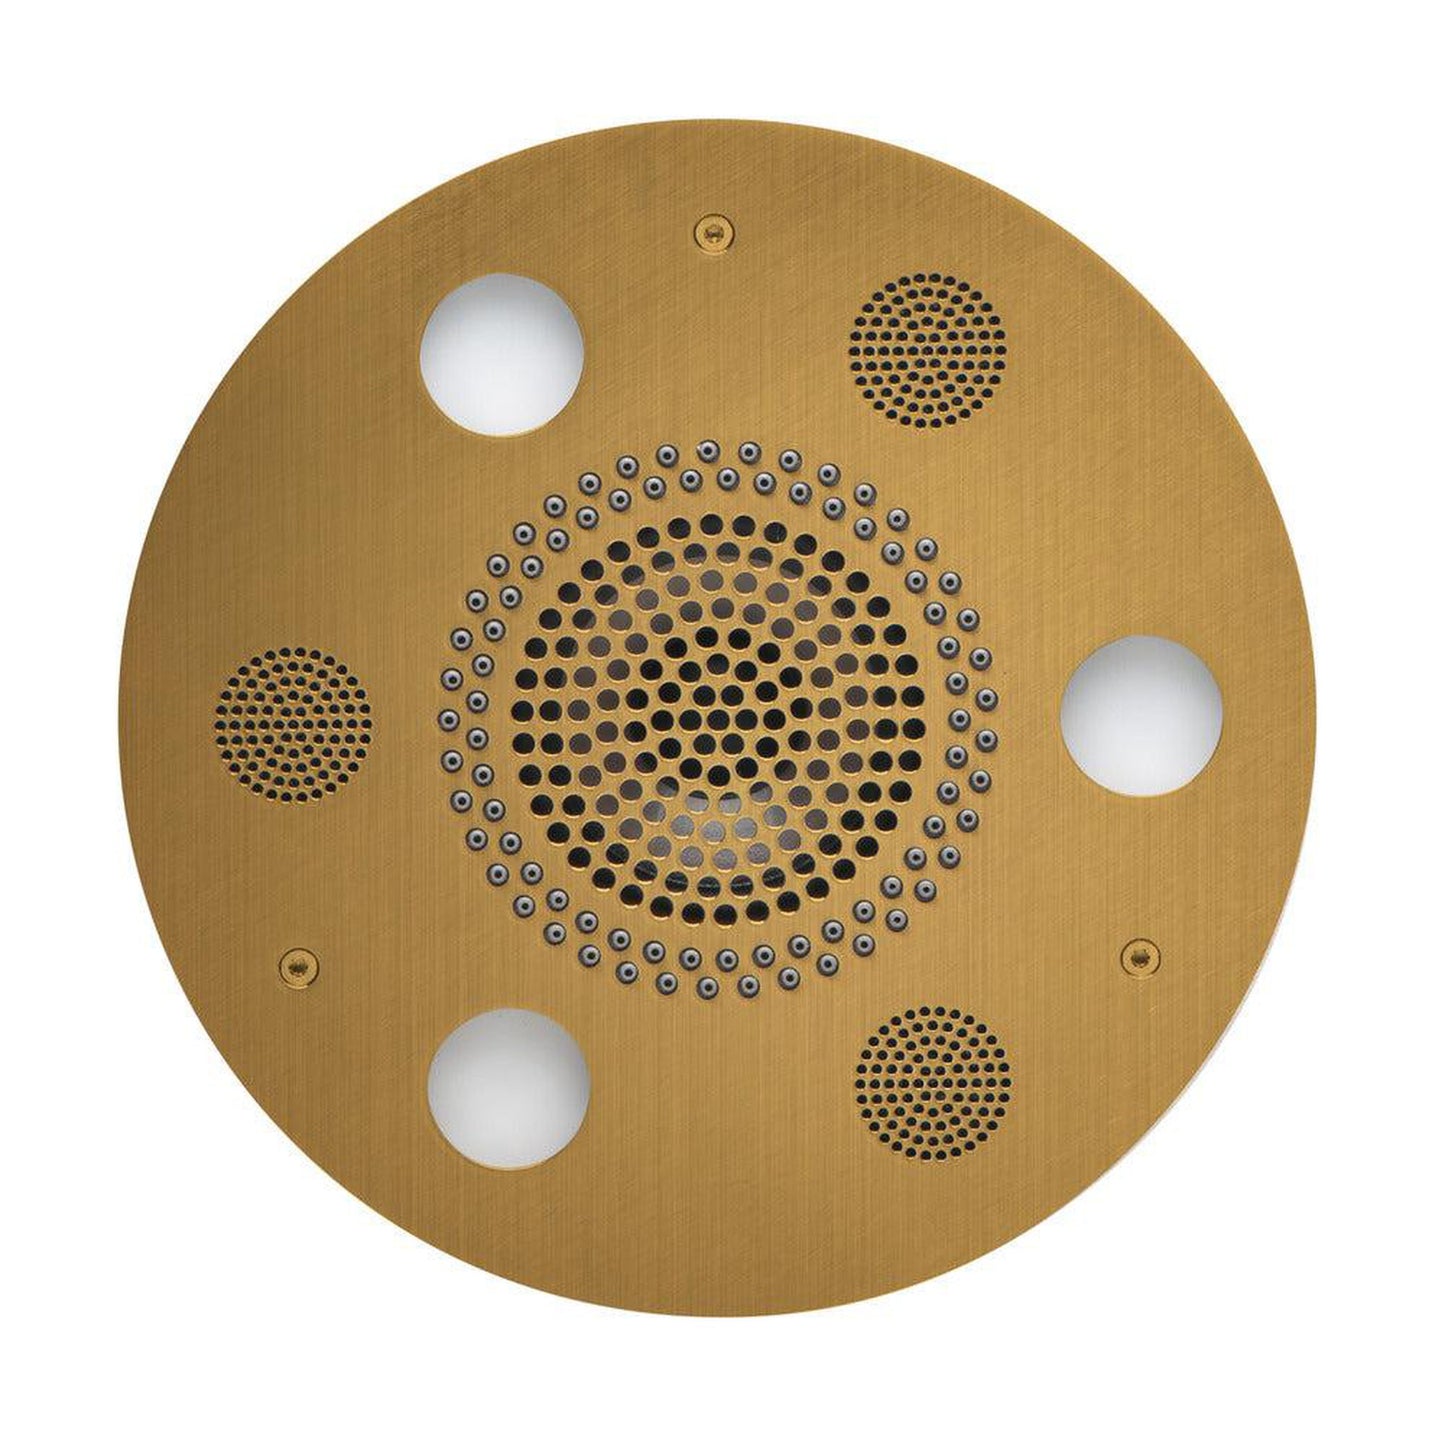 ThermaSol 10" Antique Brass Finish Round Serenity Advanced Light, Sound and Rain System